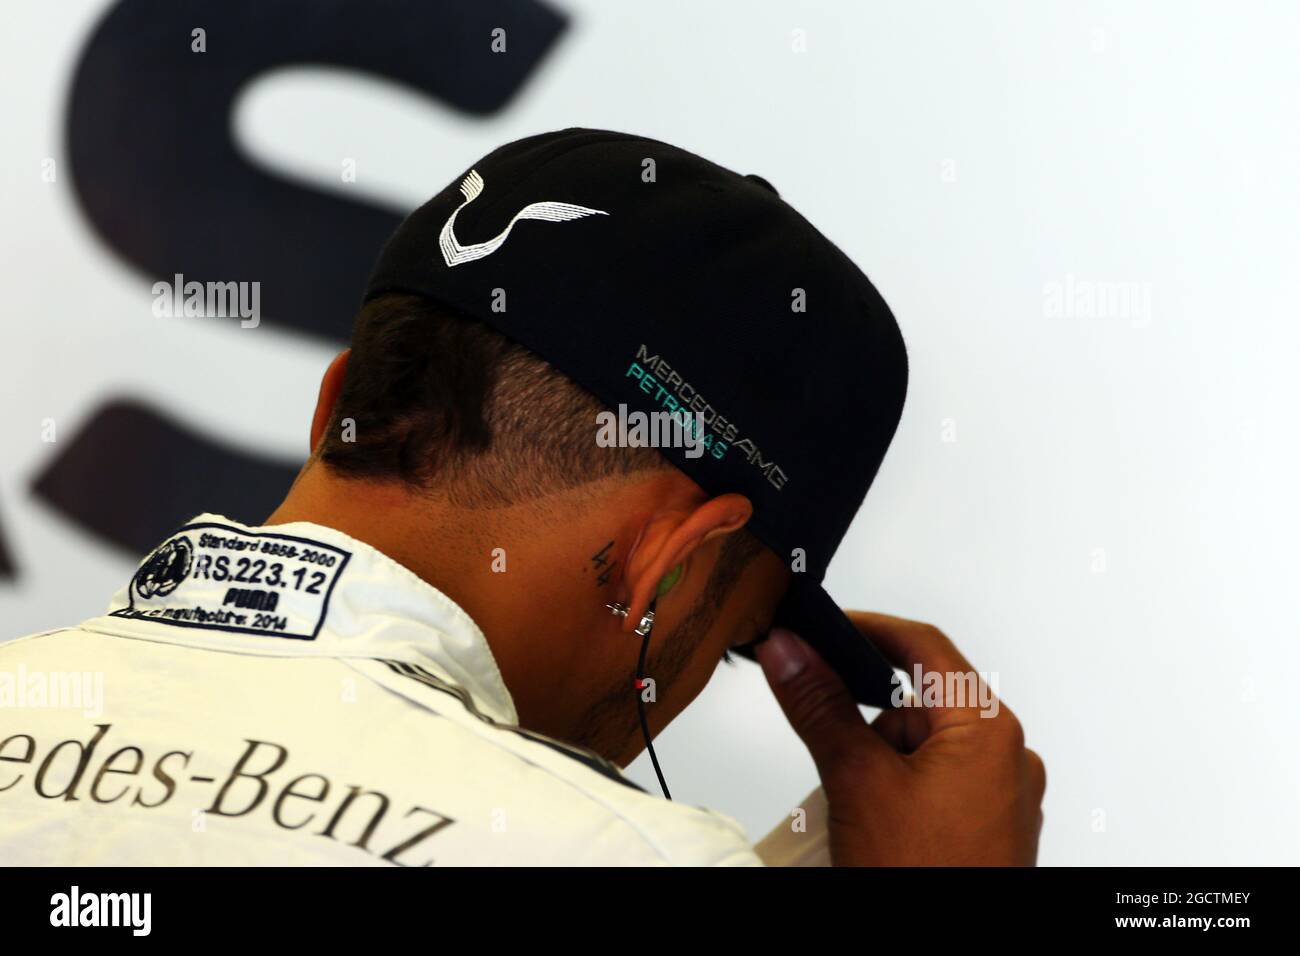 Lewis hamilton tattoo hi-res stock photography and images - Alamy